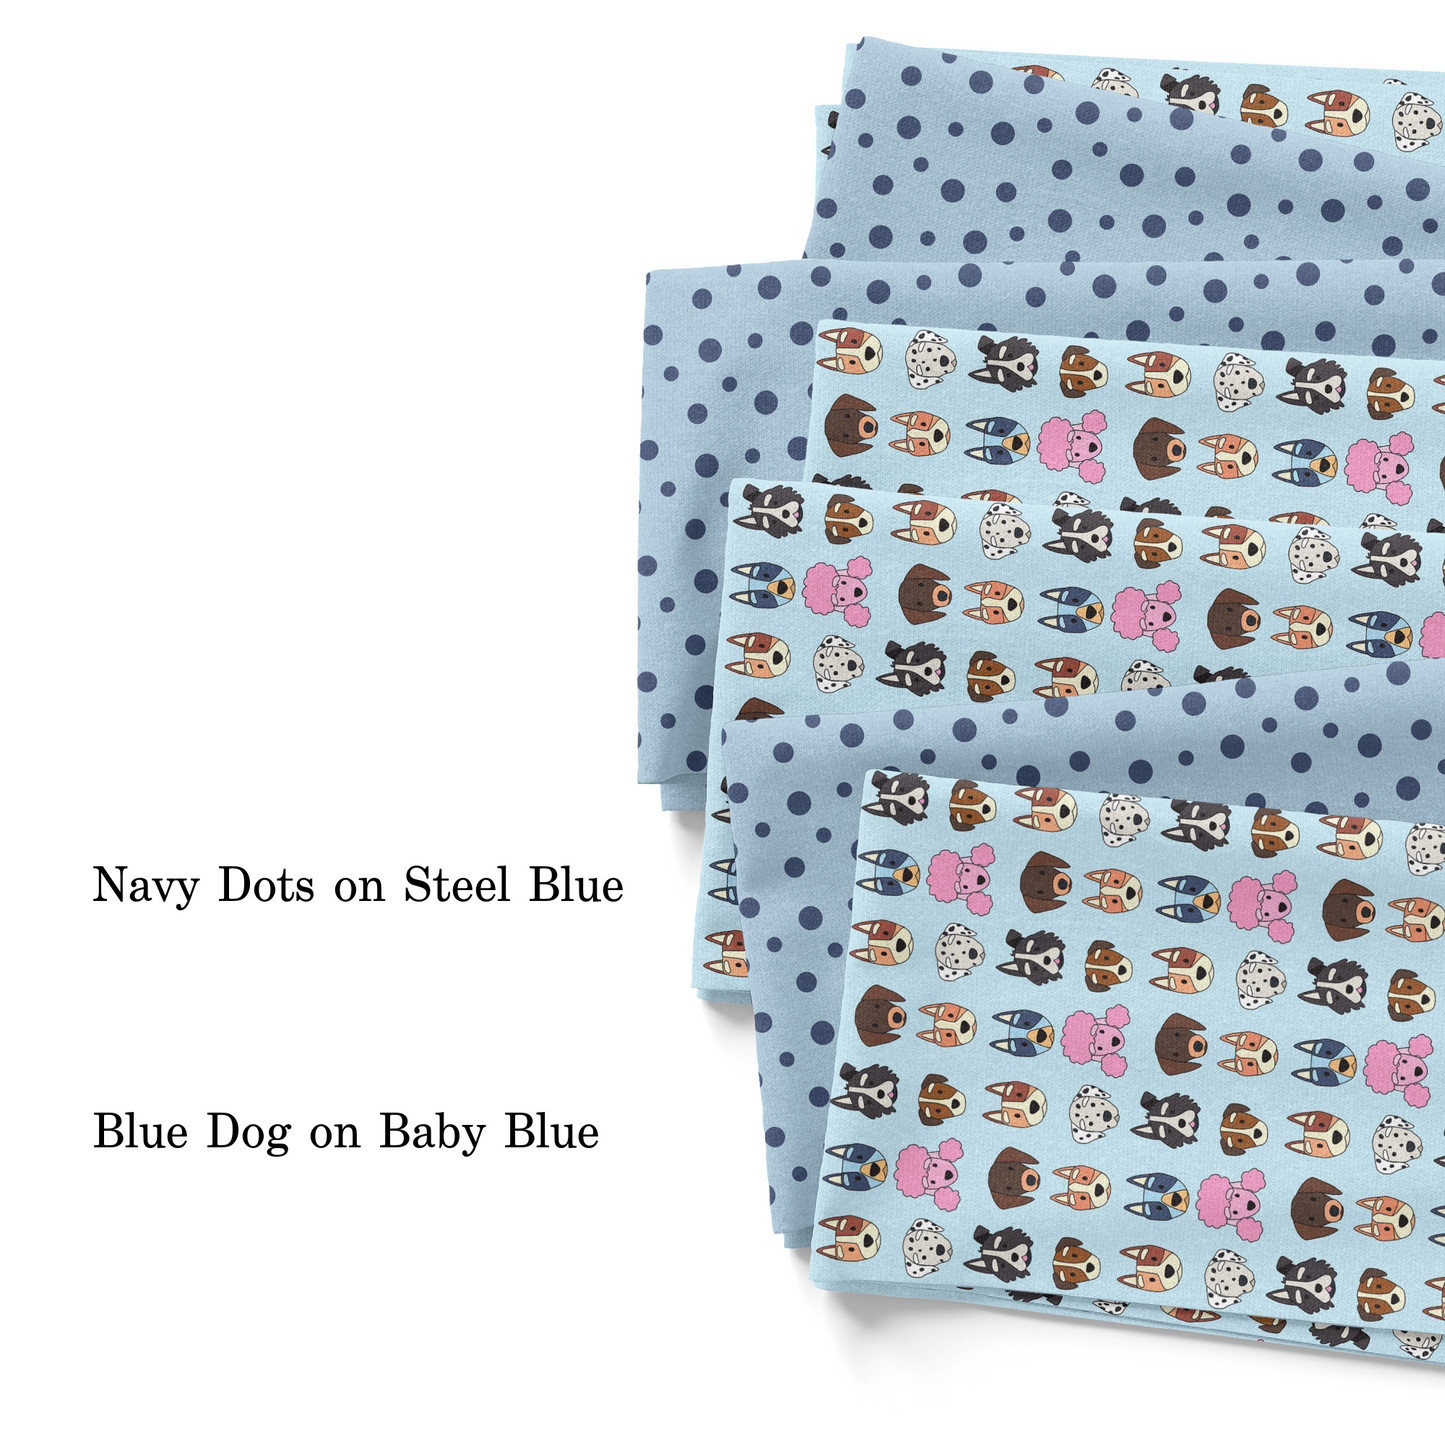 Blue Dog on Baby Pink Fabric By The Yard